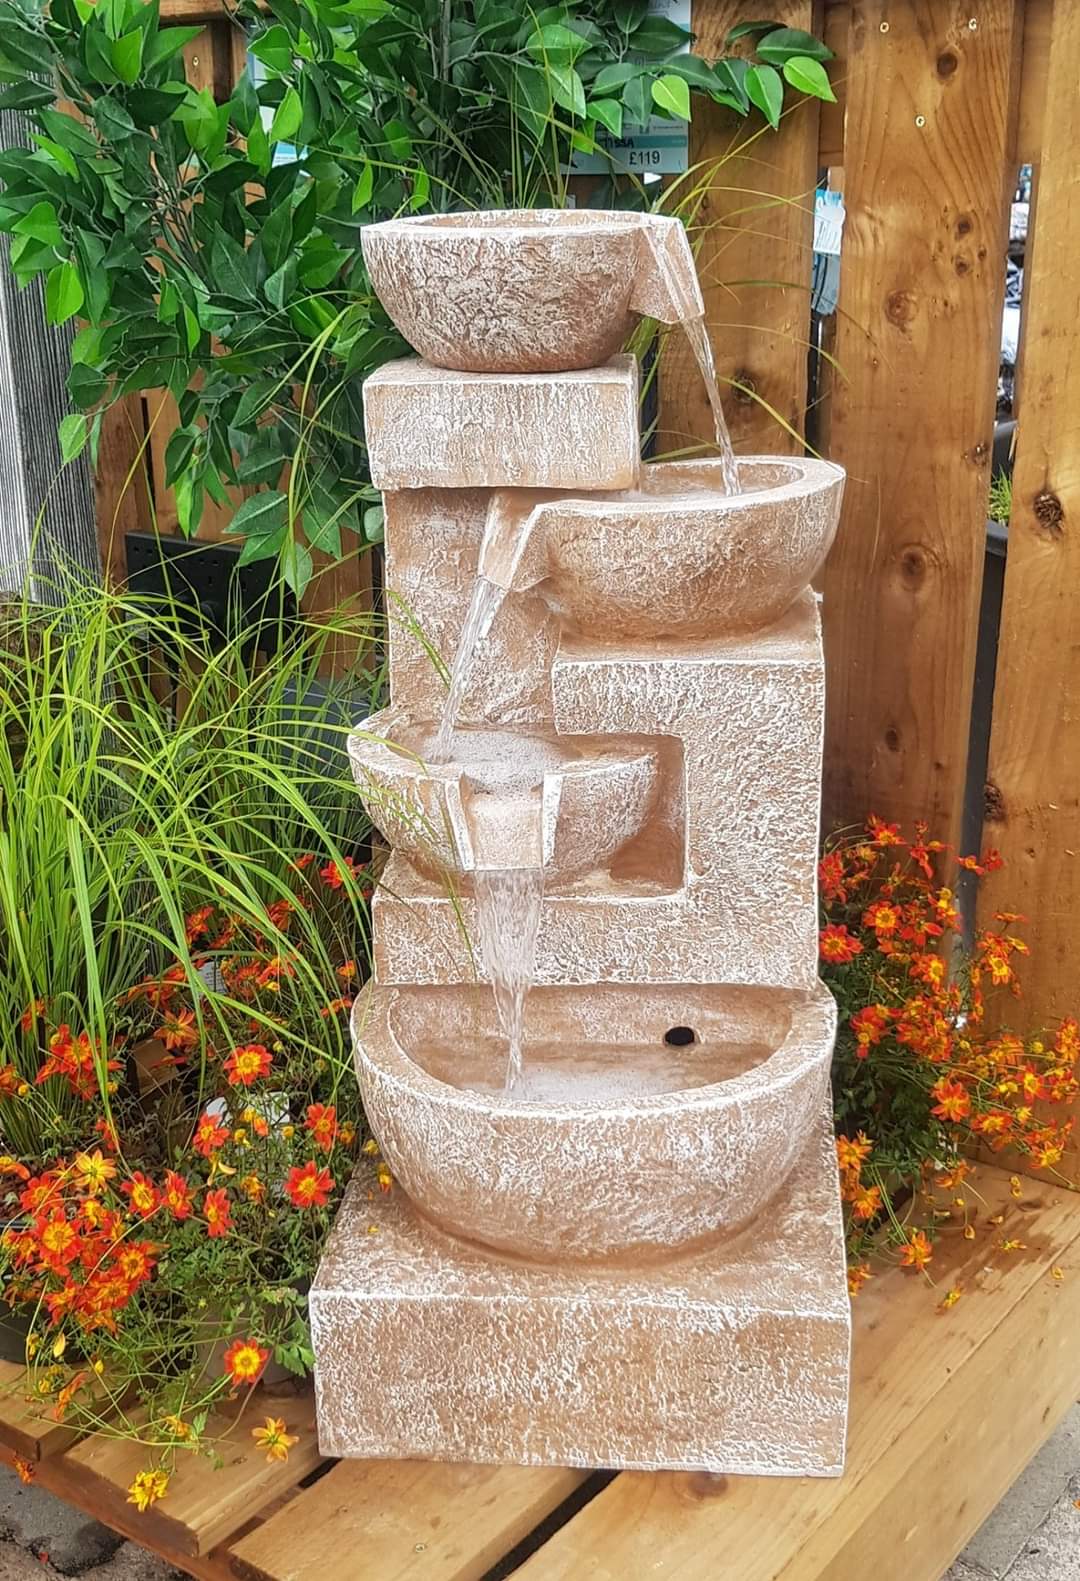 Sparkling Bowls Water Feature with Pump - No Plumbing